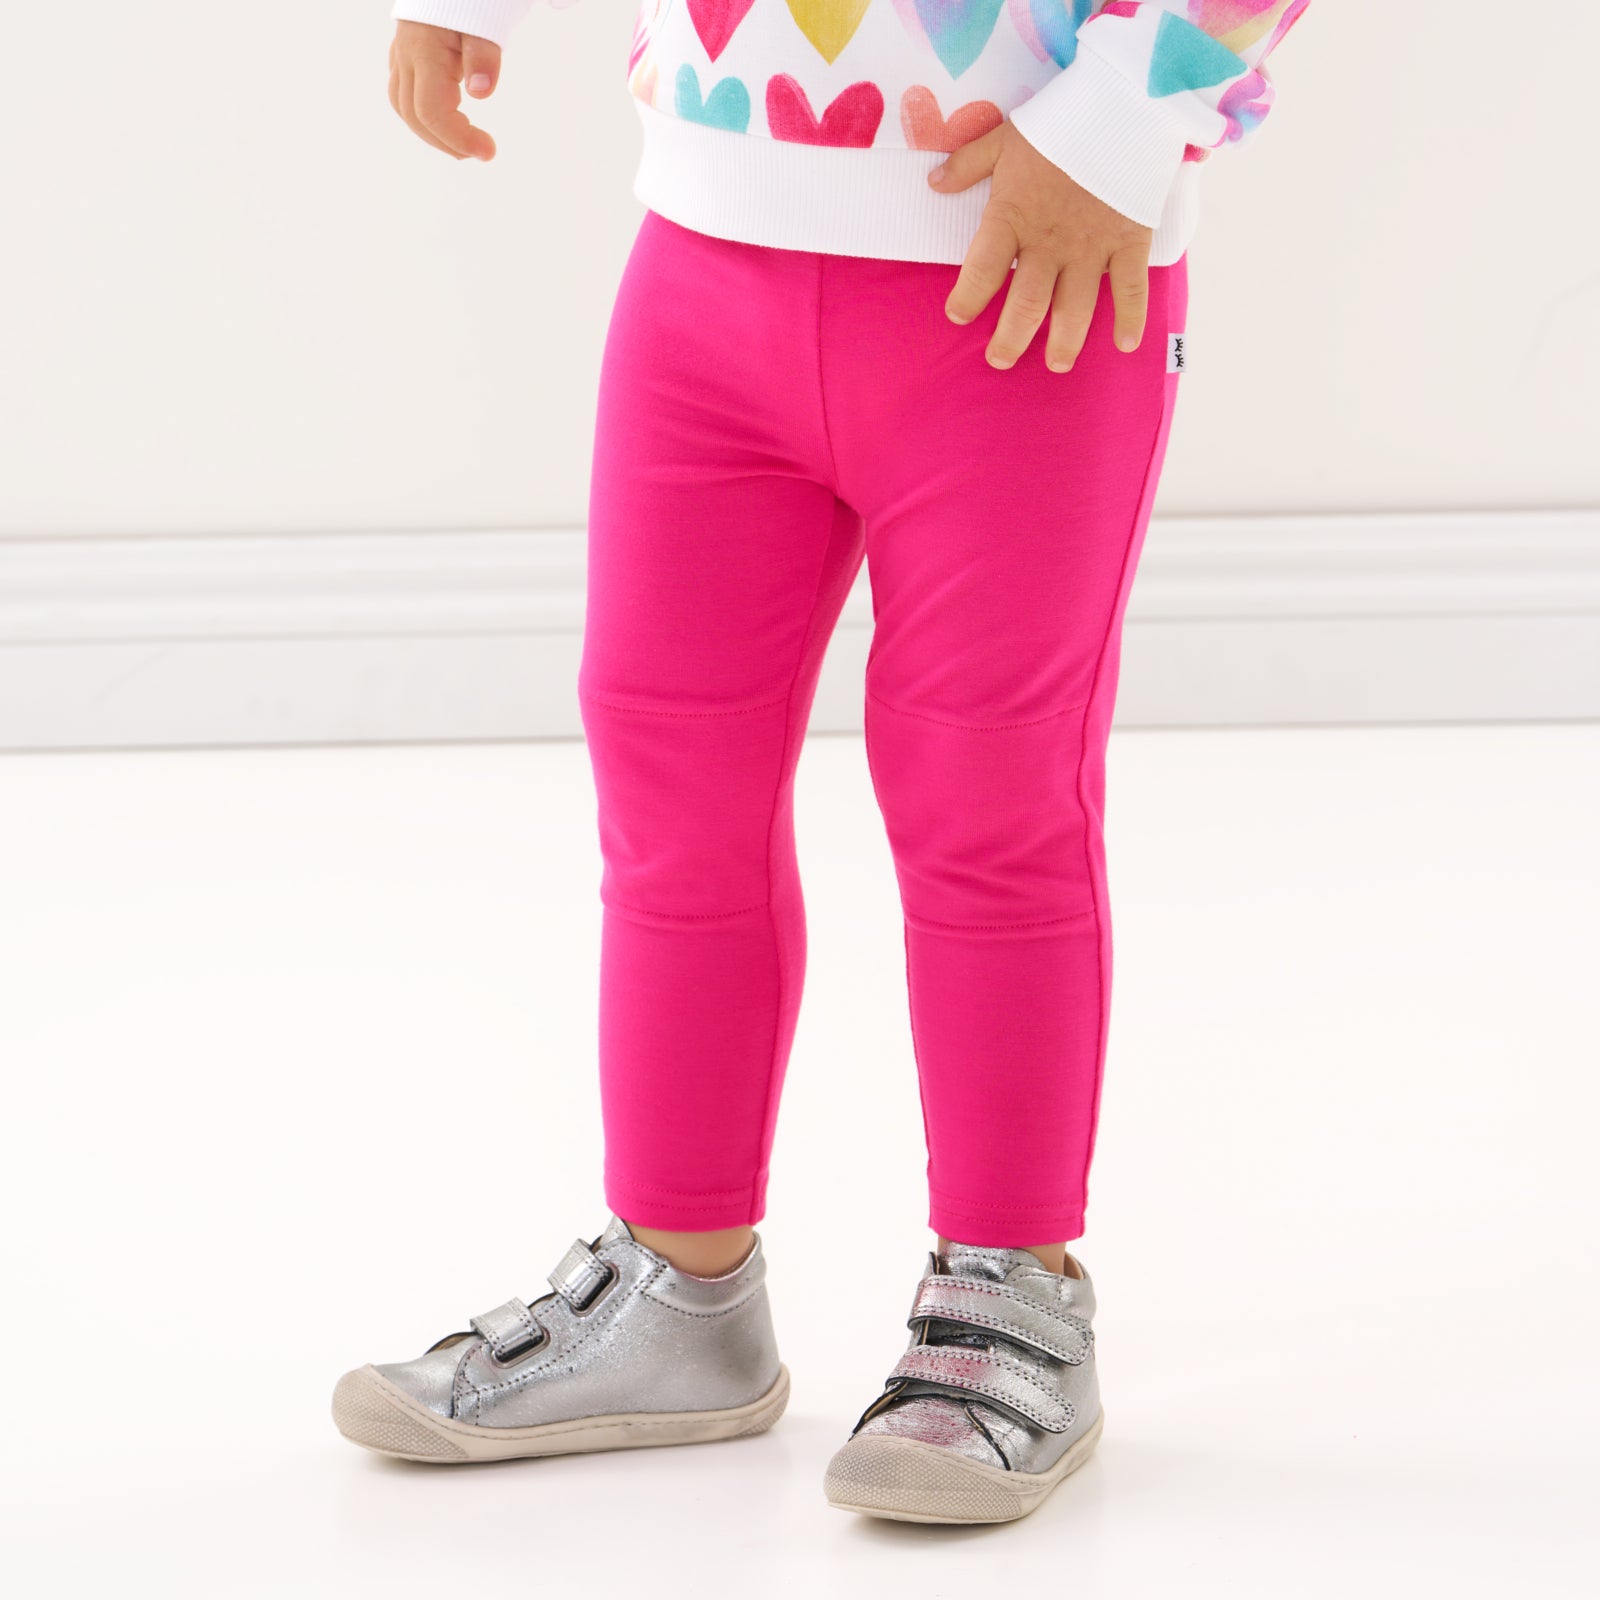 Alternate close up image of a child wearing Pink Punch leggings